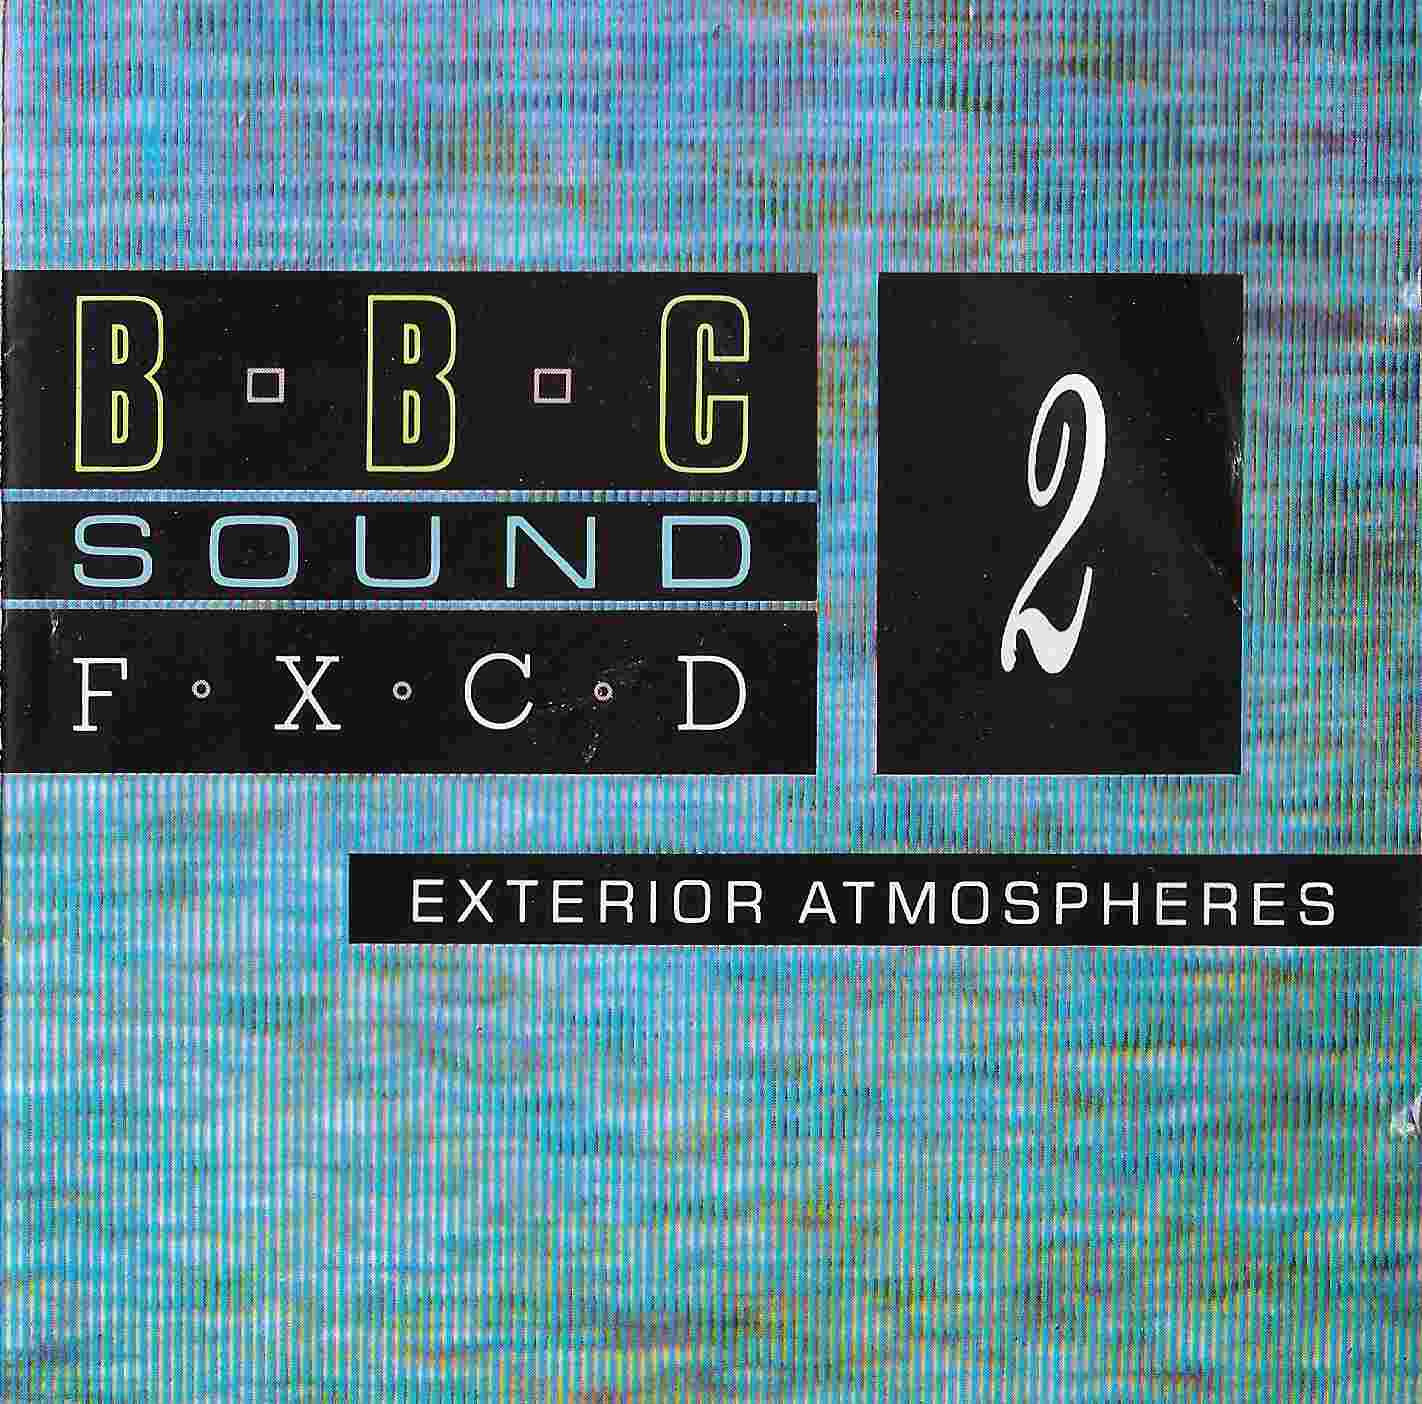 Picture of BBCCD SFX002 Exterior atmospheres by artist Various from the BBC records and Tapes library